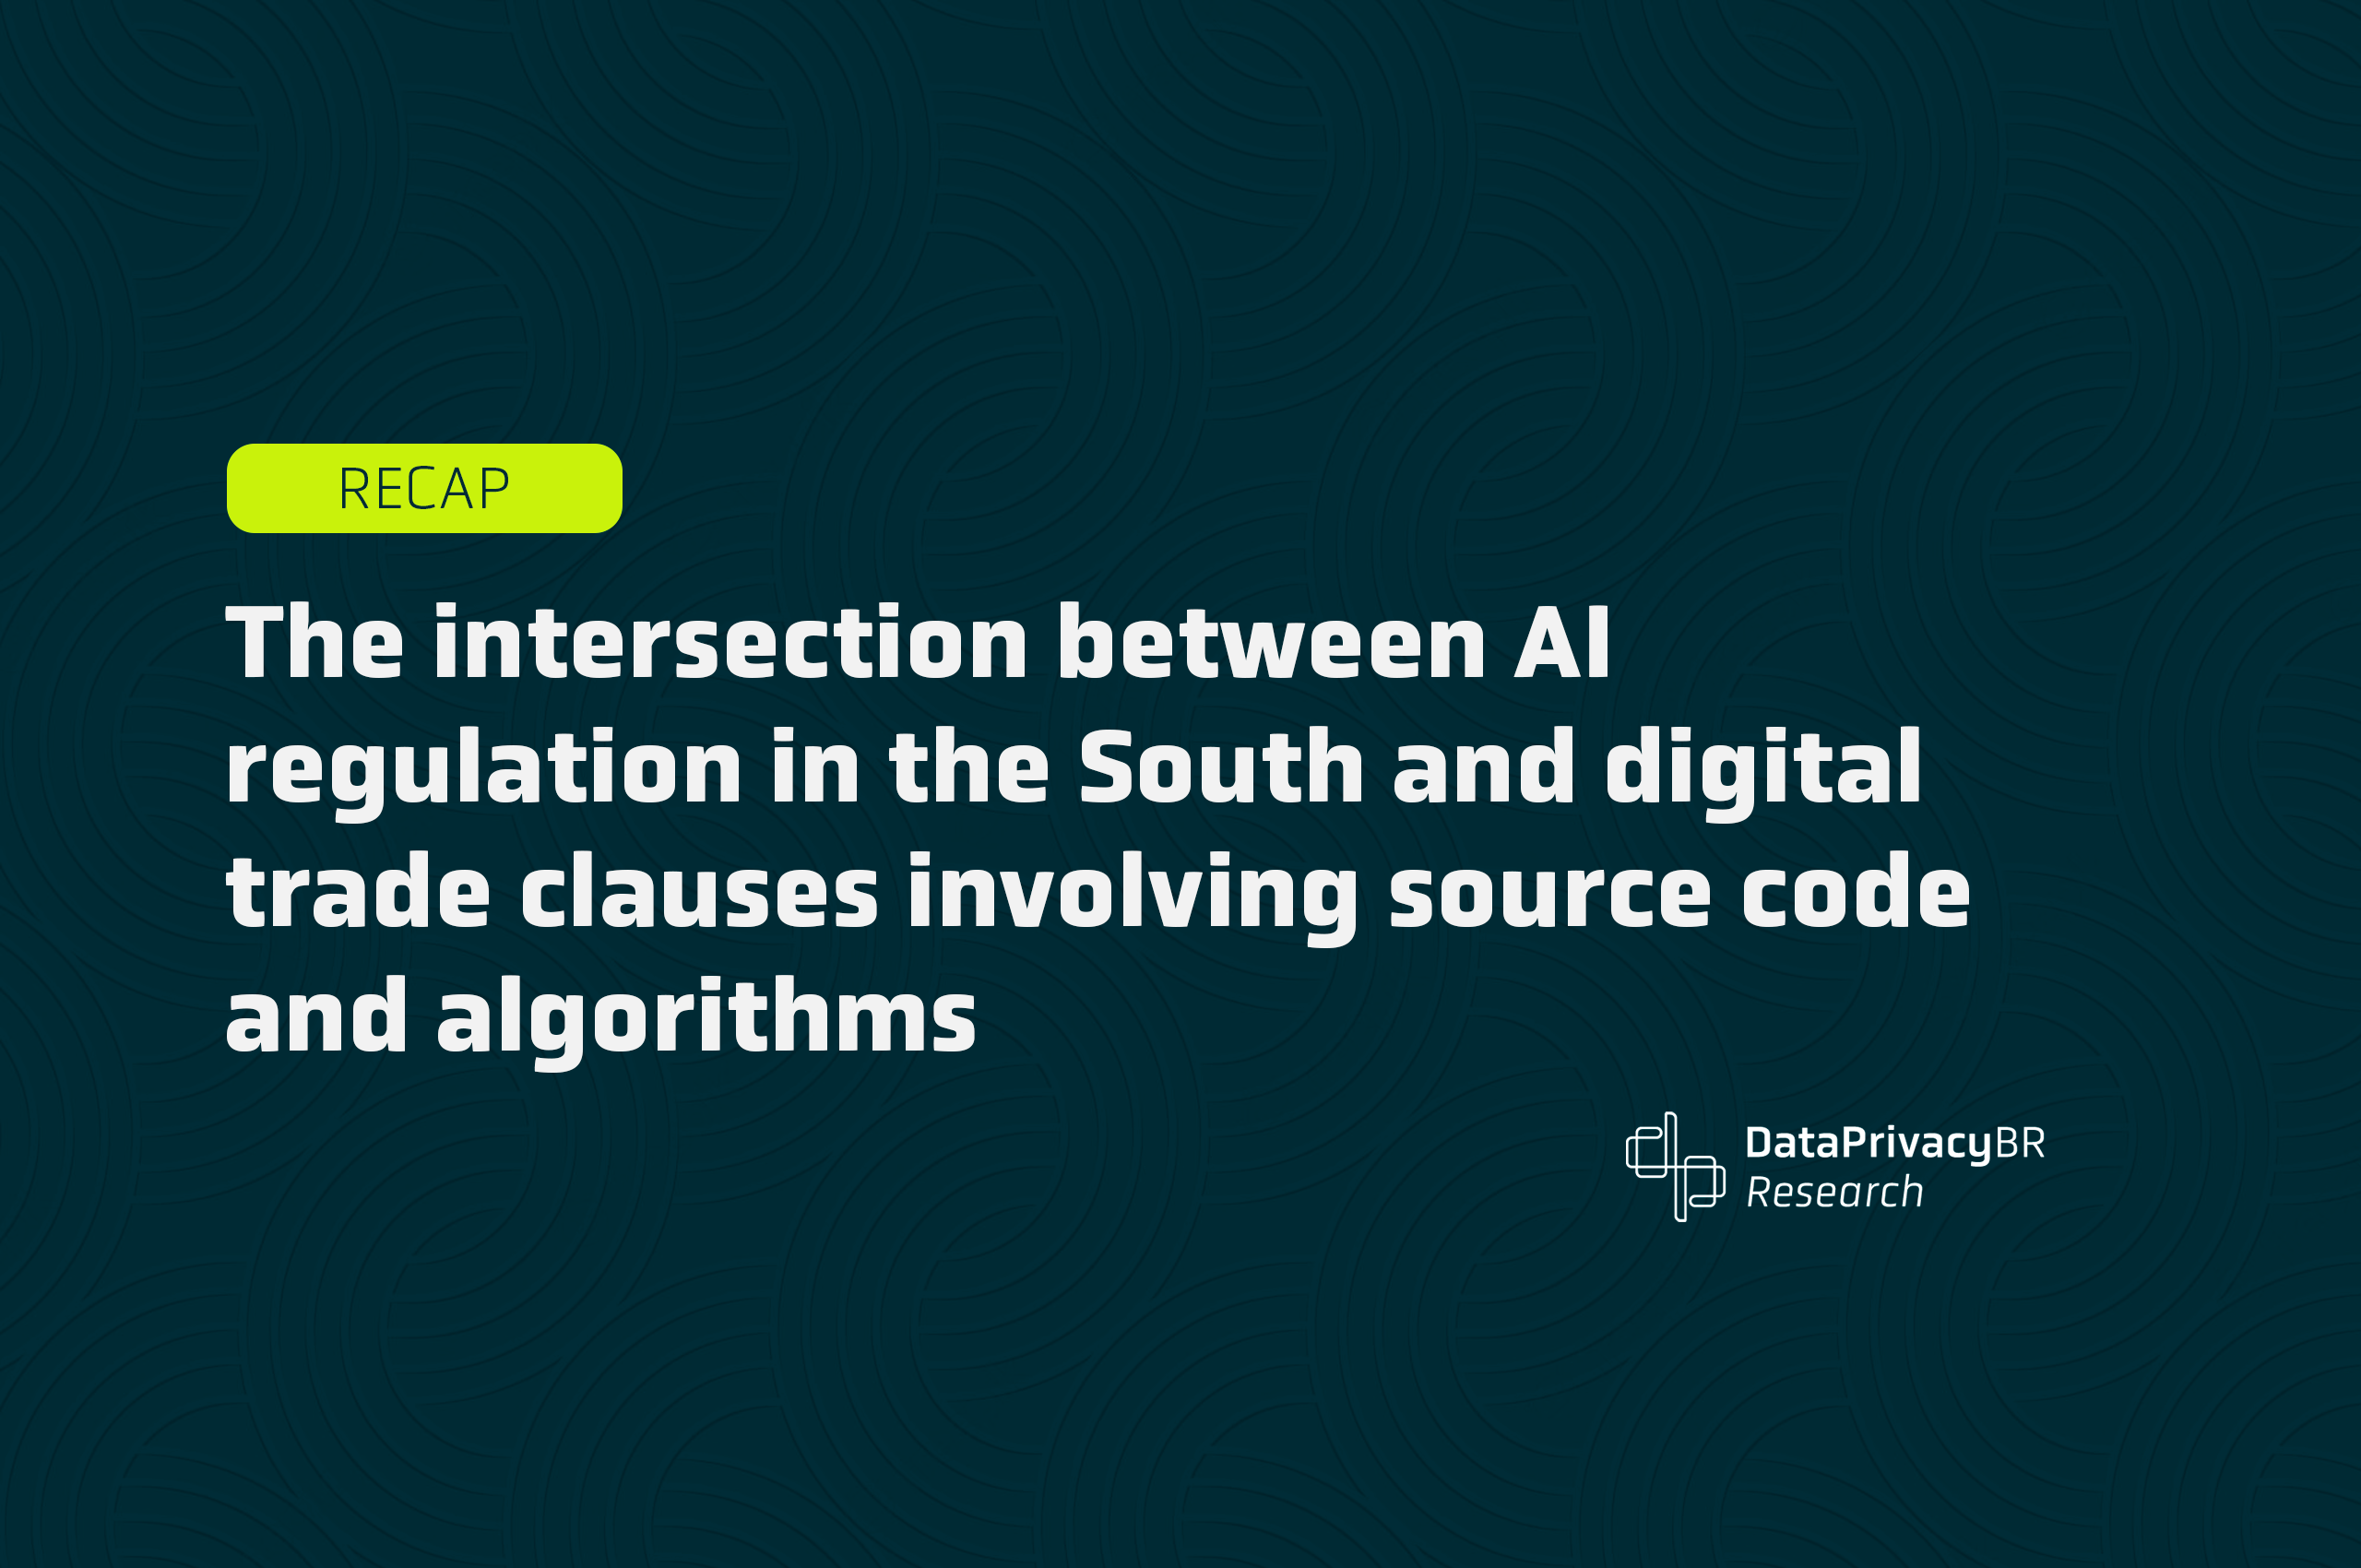  The intersection between AI regulation in the South and digital trade clauses involving source code and algorithms